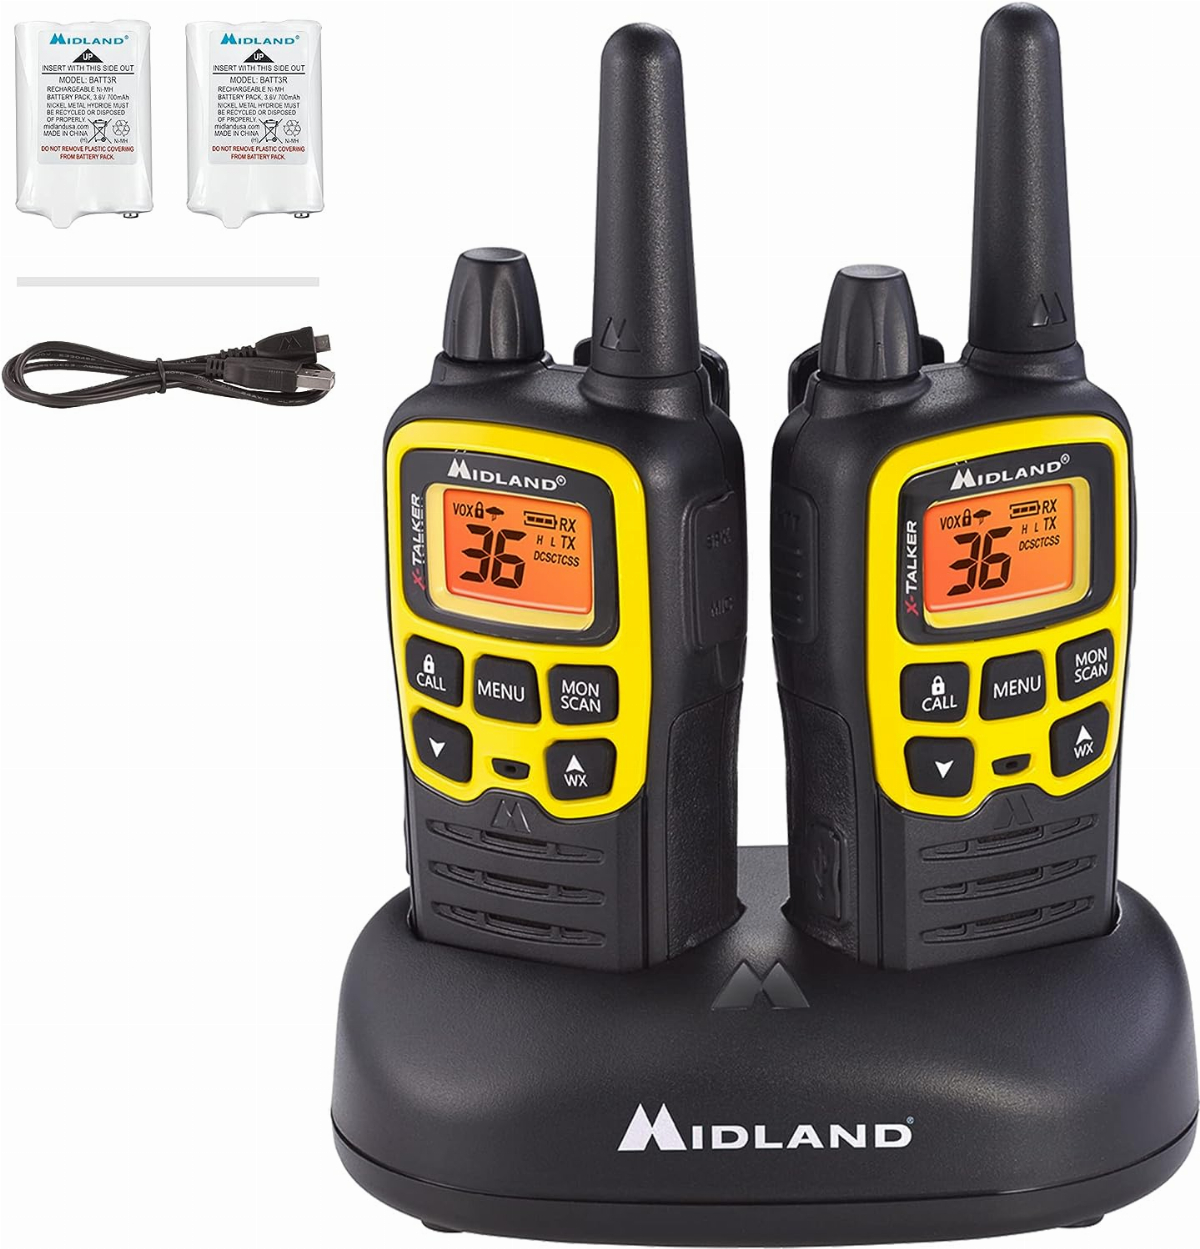 Buy Midland Top Products at Best Prices online